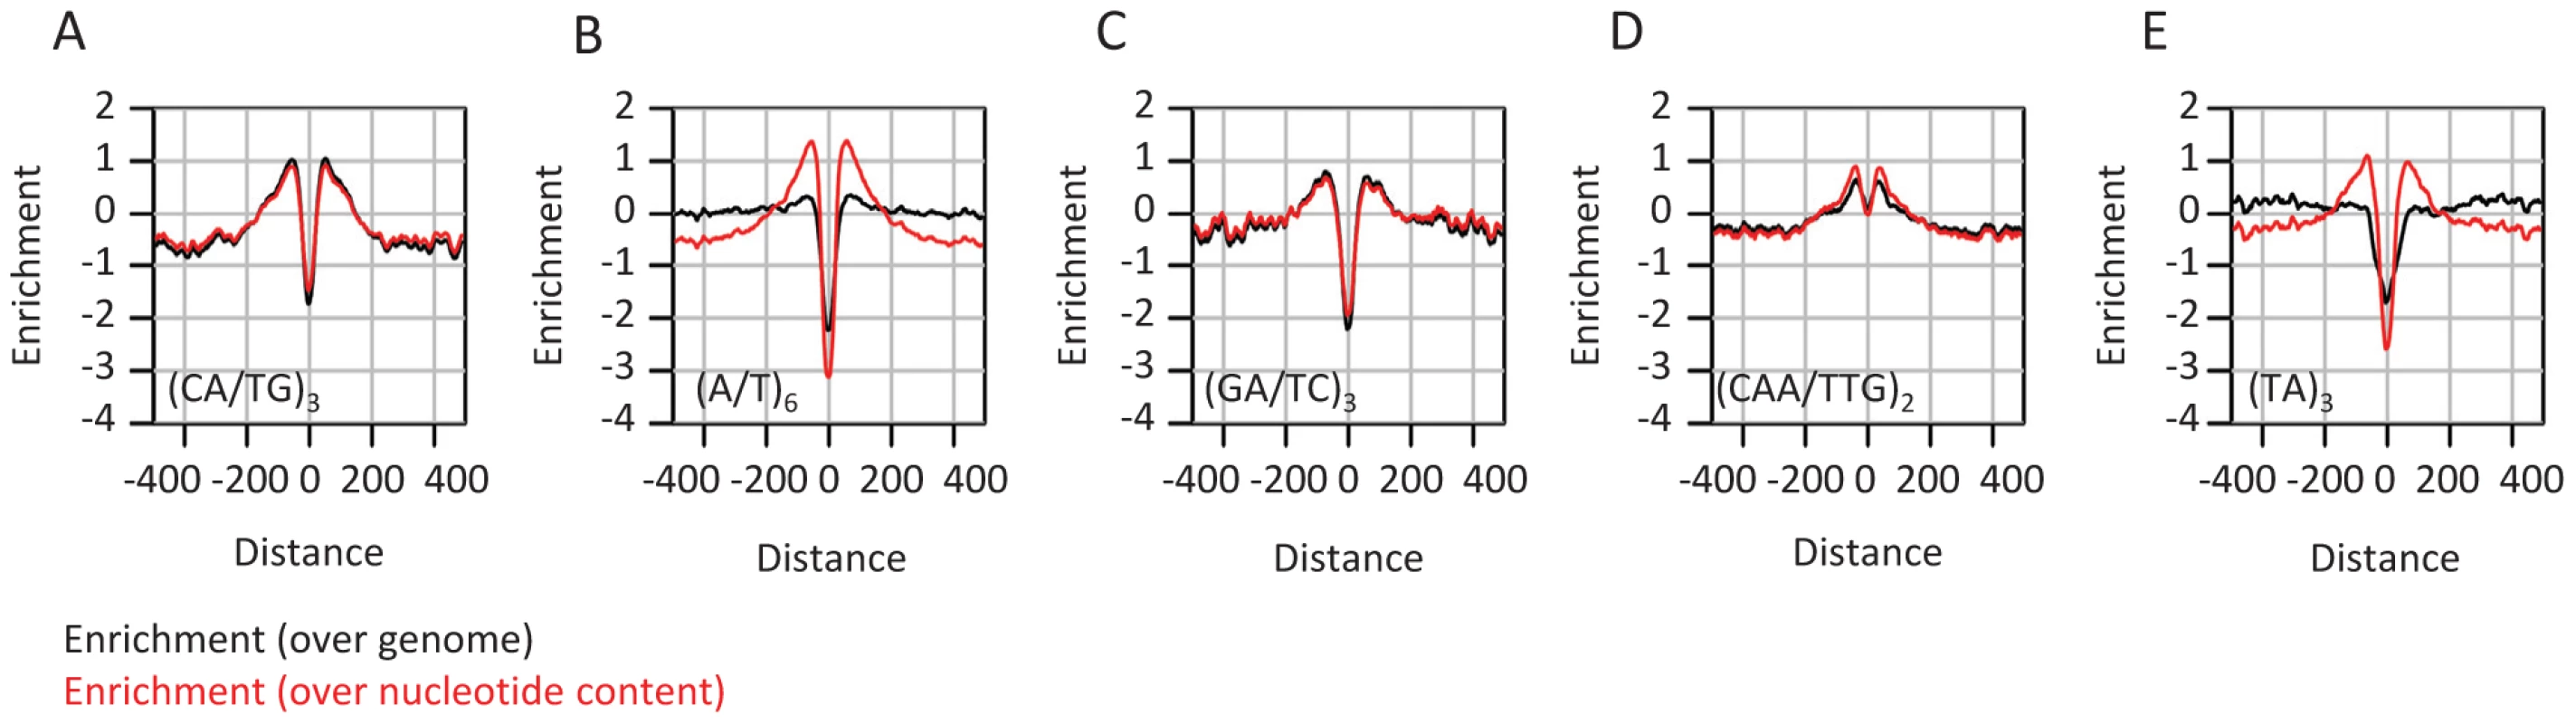 Enrichment of microsatellites in the proximity of conserved elements.